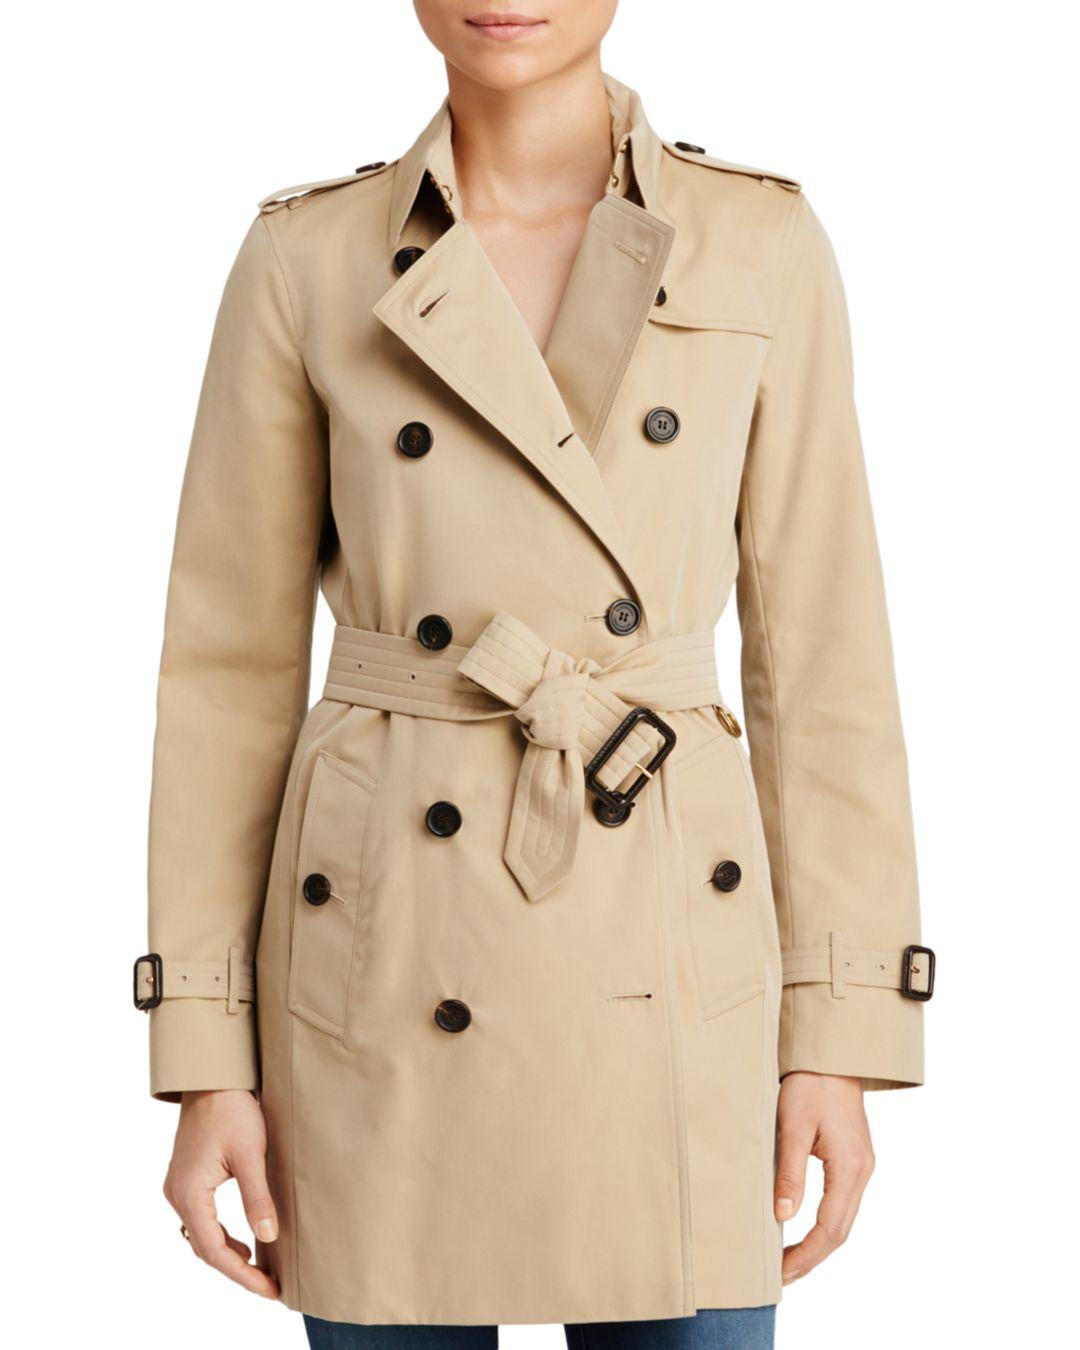 Lyst - Burberry Kensington Mid-length Heritage Cotton Trench Coat in ...